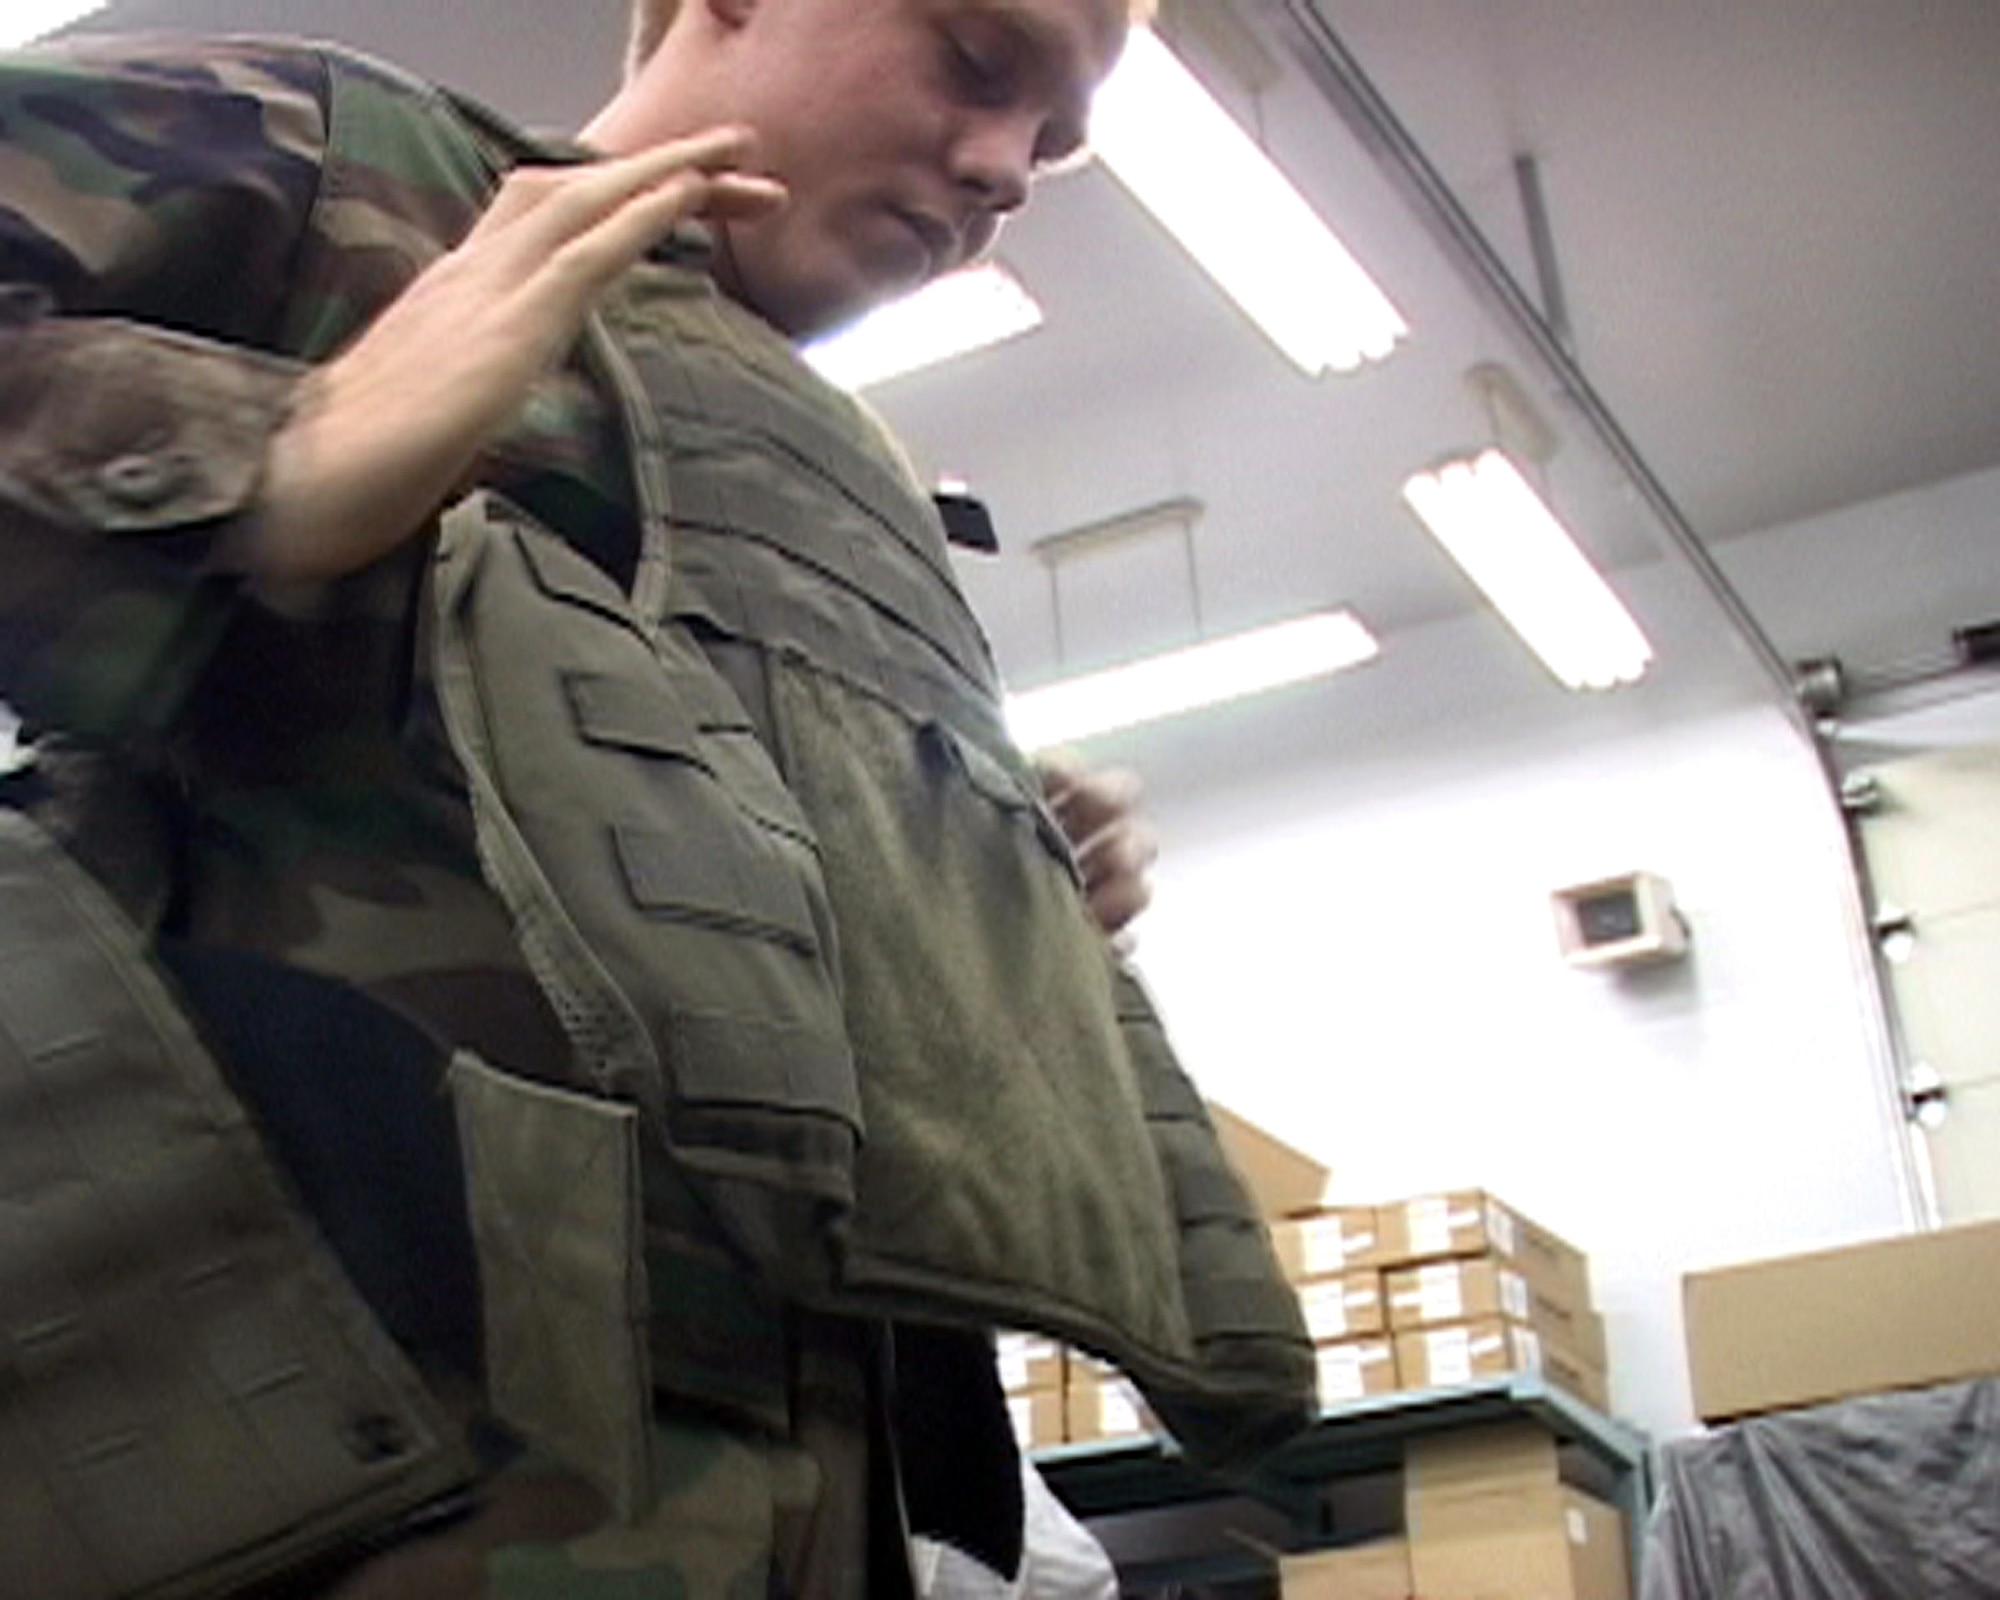 Airman Samuel Martinek tries on a flak-vest as he prepares for his upcoming deployment. Airman Martinek is assgined to the 35th Security Forces Squadron at Misawa Air Base, Japan. (U.S. Air Force photo/Seaman Shane Arrington)